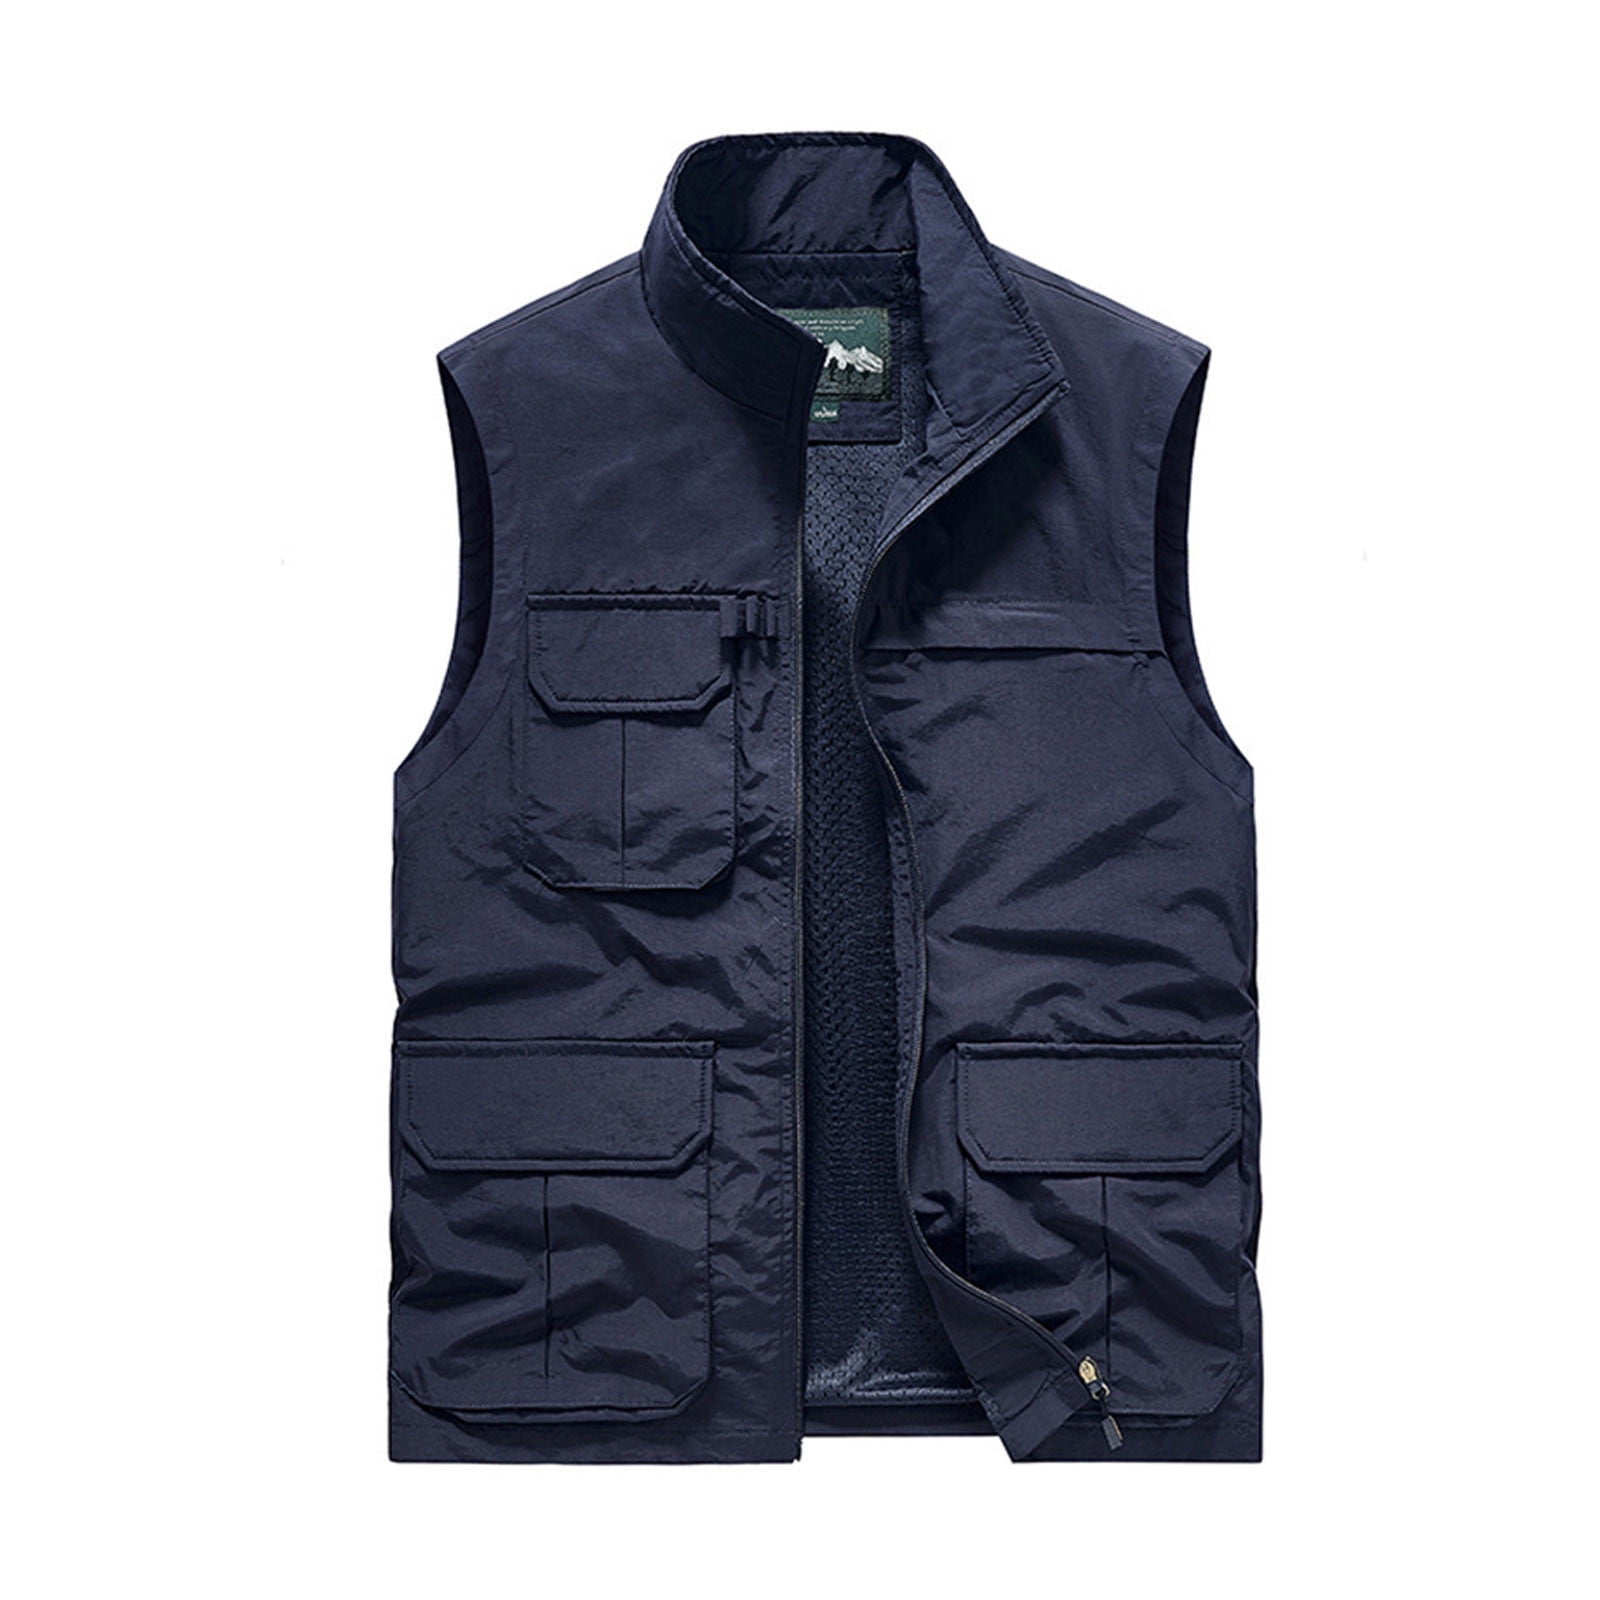 TMOYZQ Men's Fishing Vest Outdoor Work Travel Photo Cargo Vest Jacket with  Multi Pockets Casual Quick-Dry Lightweight Breathable Waistcoat Jacket 